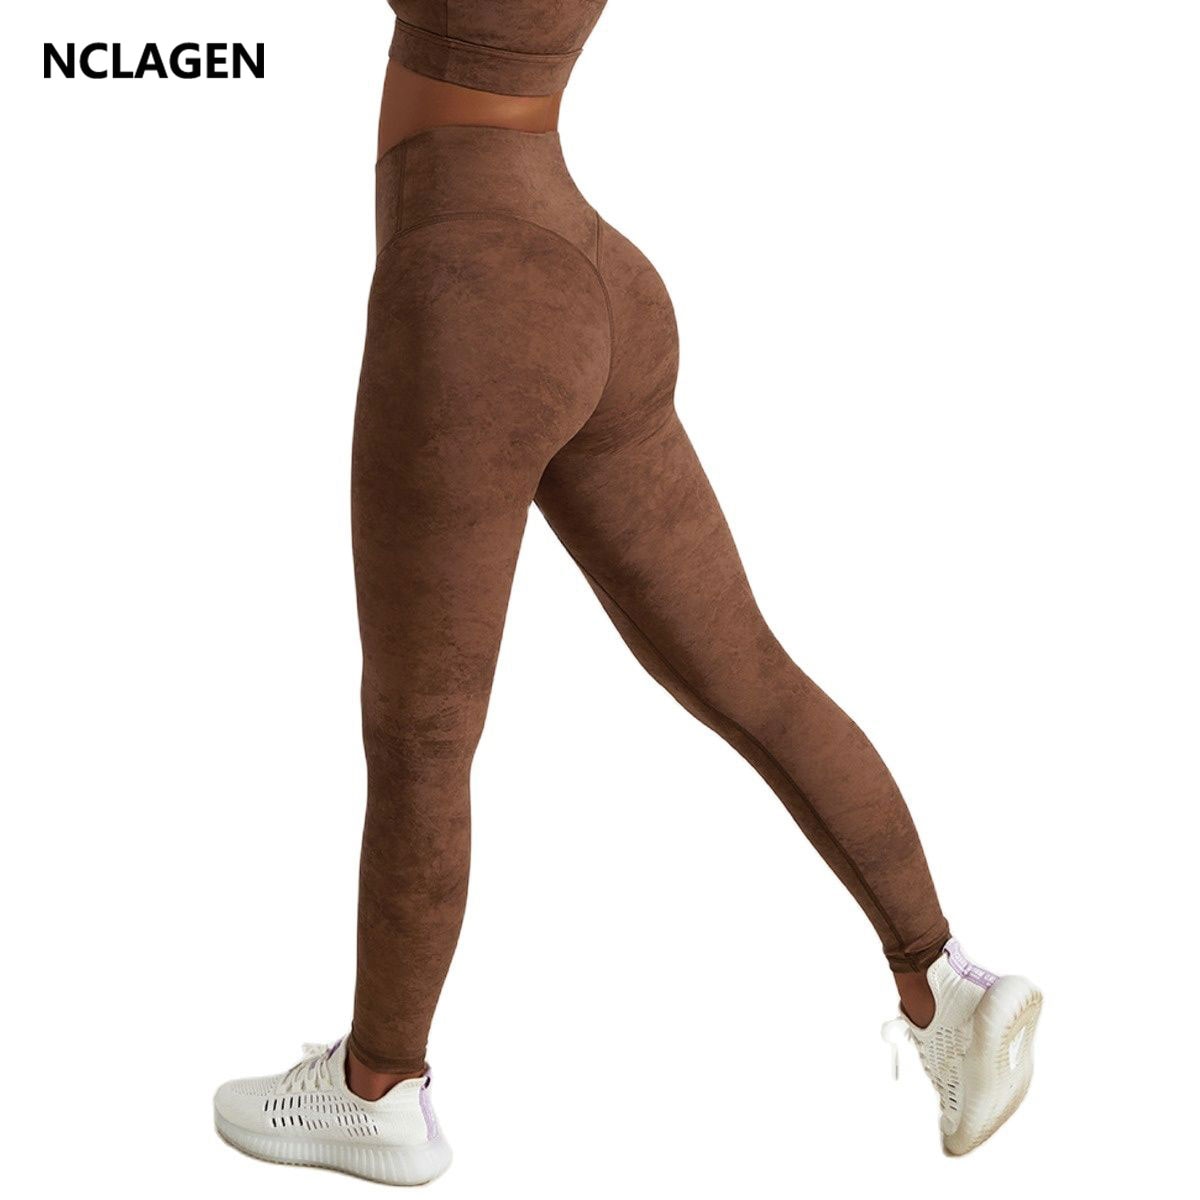 NCLAGEN Yoga Pants Women Running Fitness Leggings GYM High Waist Peach Hip Lifting Nylon Breathable Buttery-Soft Sports Tights